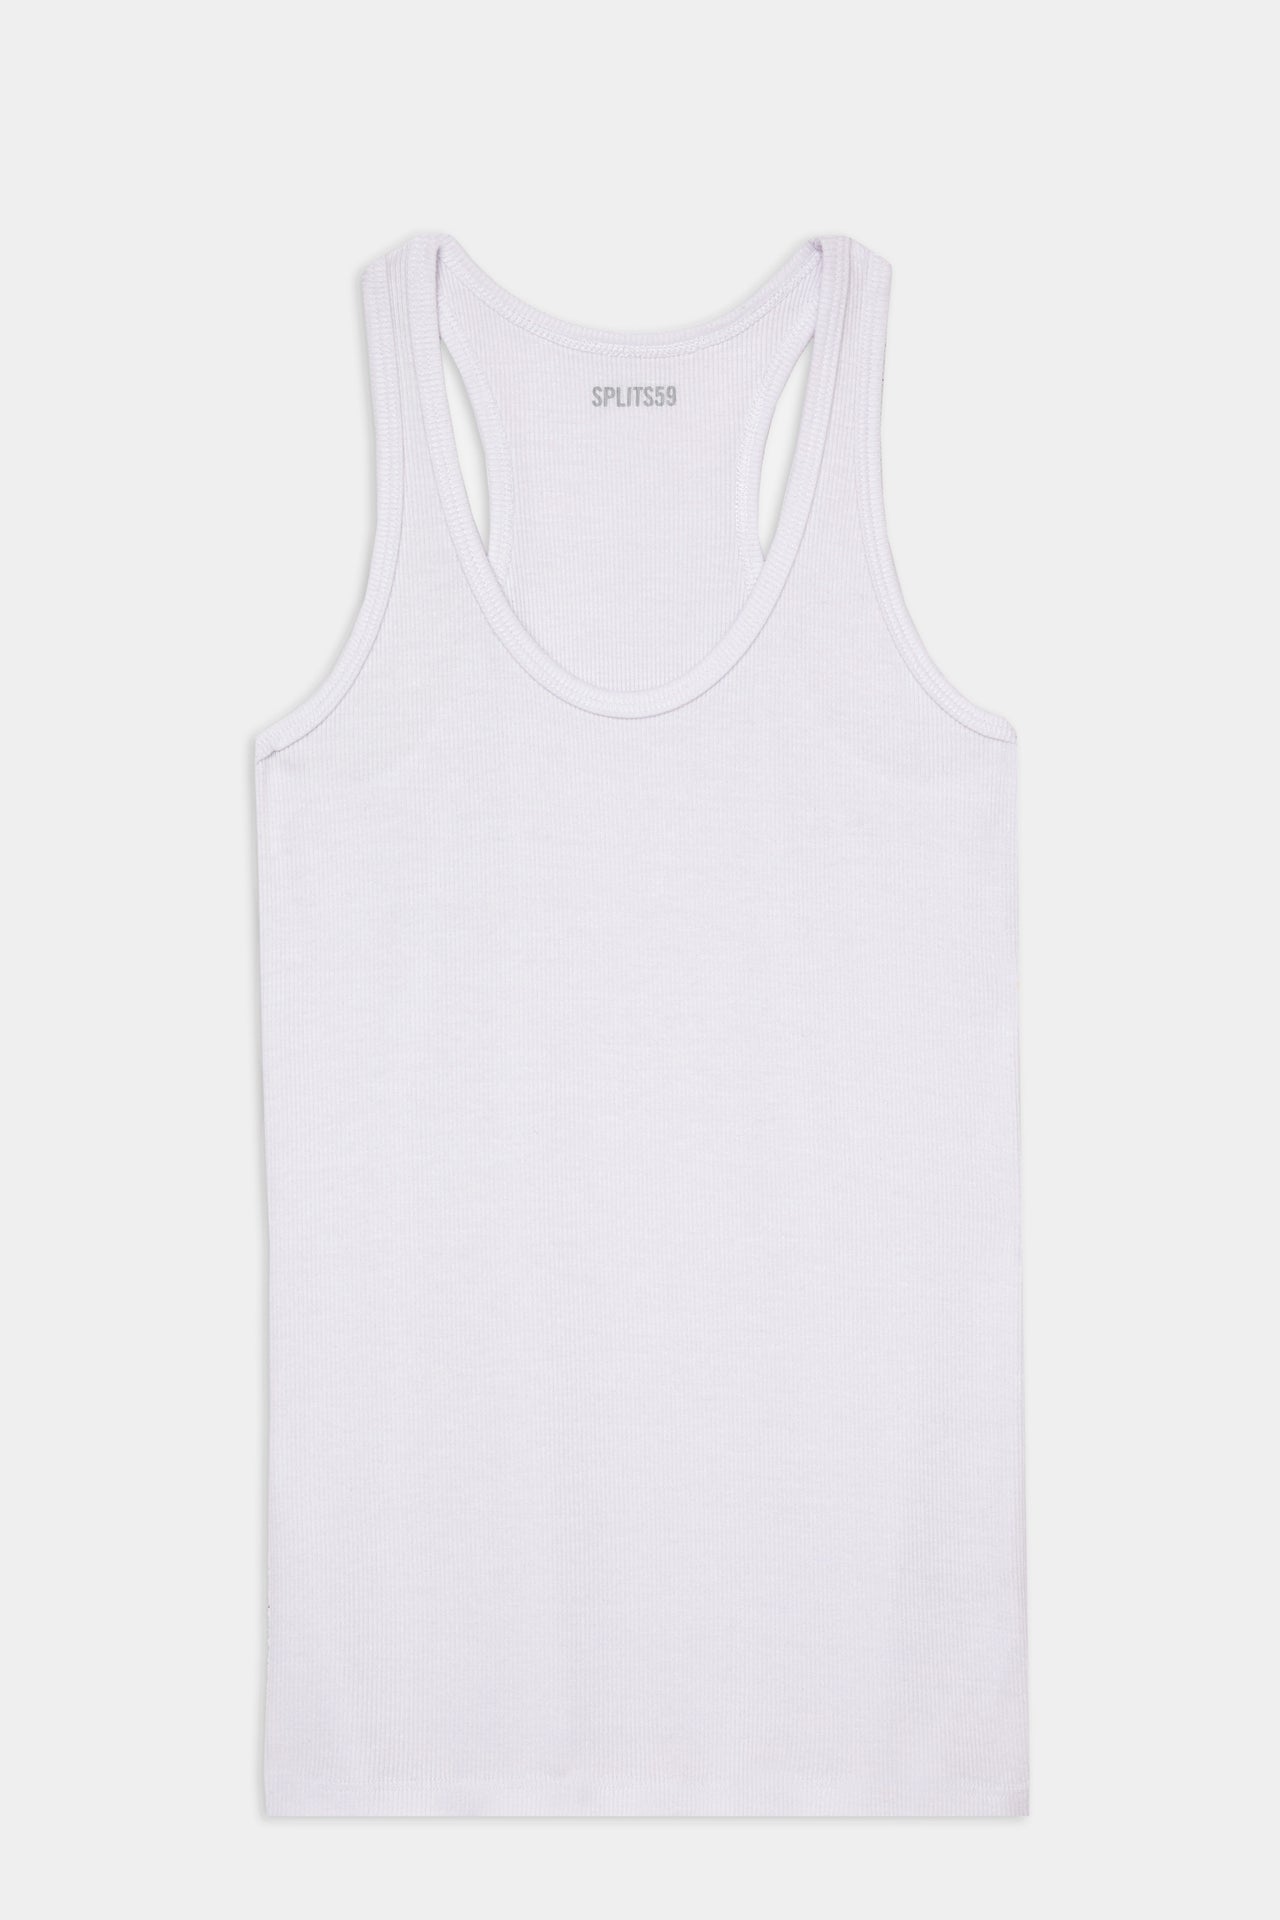 Flat view of white ribbed tank top